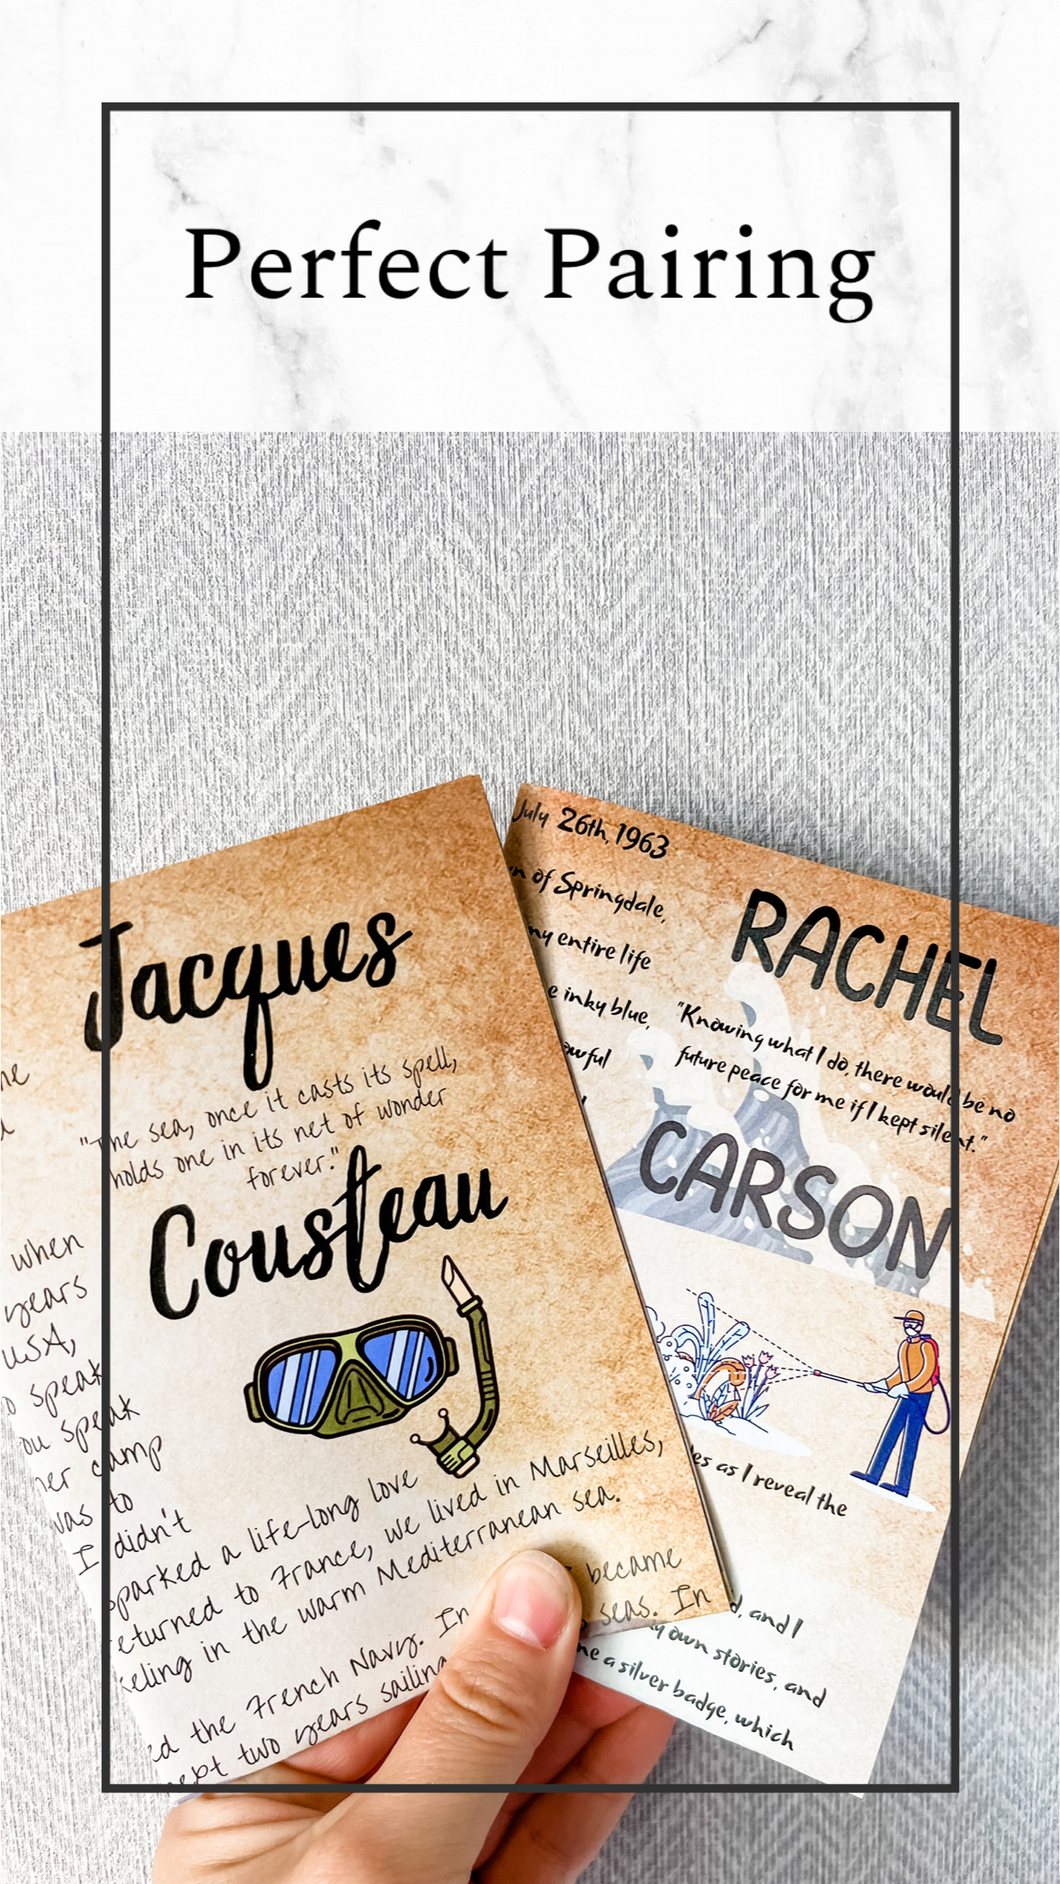 Perfect Pairing: Jacques Cousteau and Rachel Carson